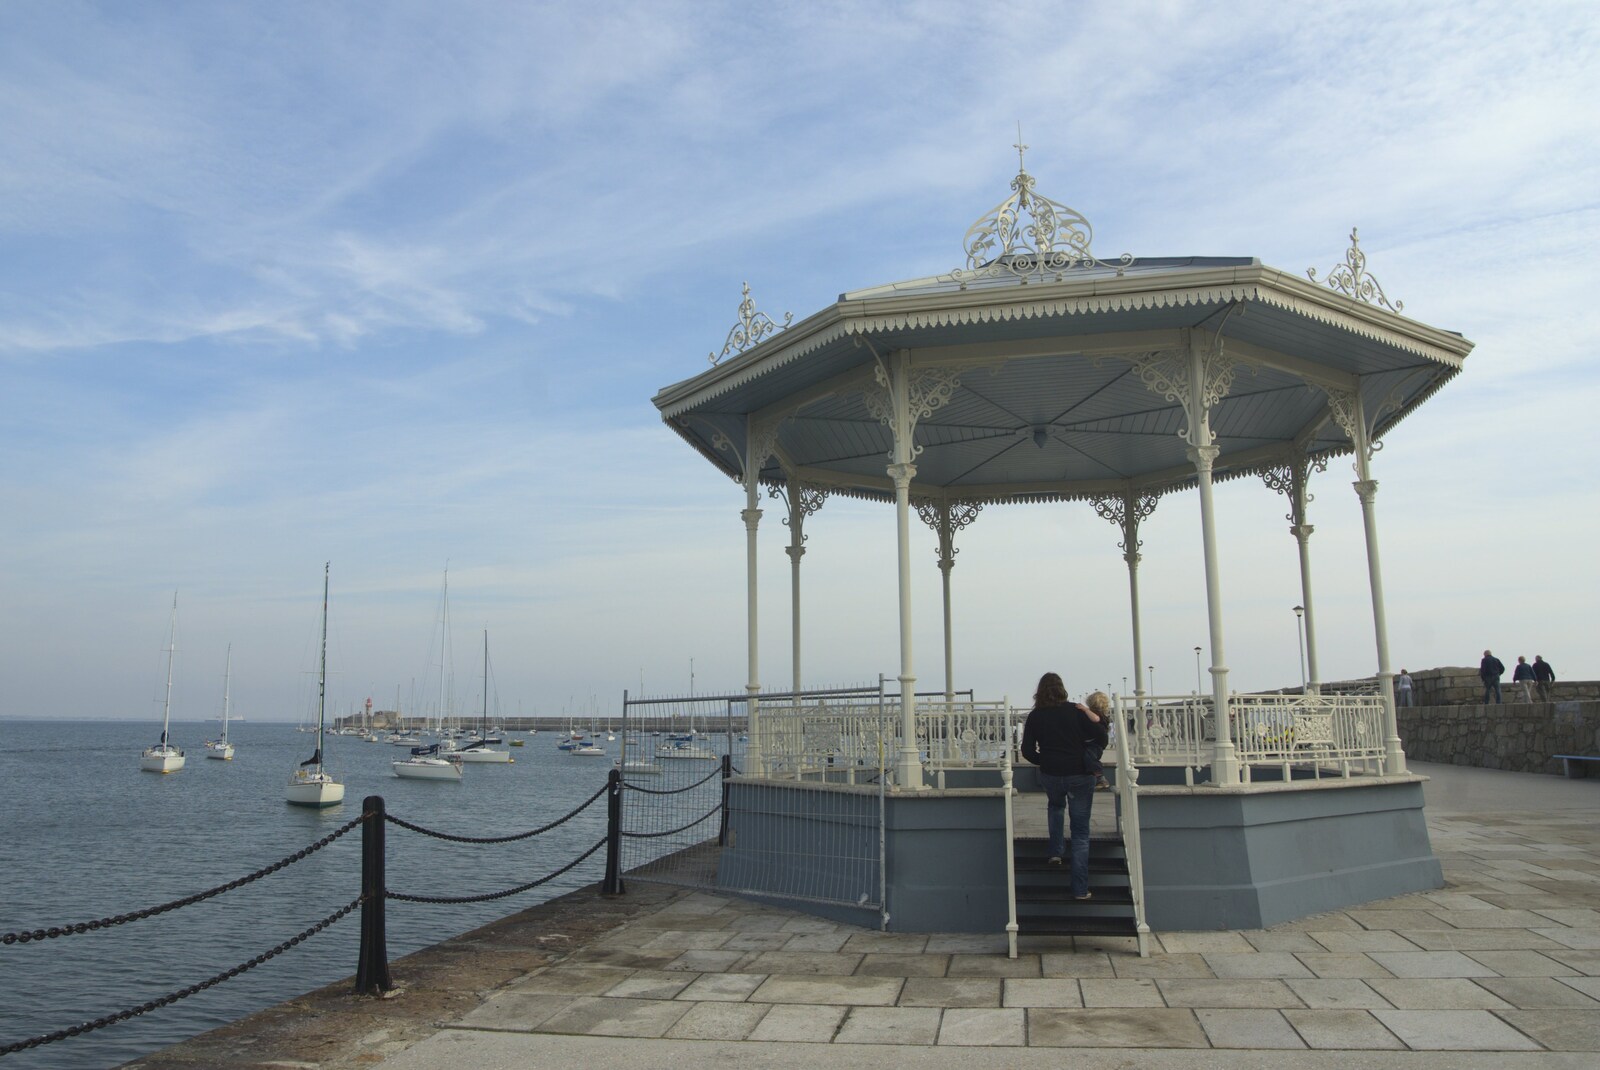 Sea-side band stand from A Day in Dun Laoghaire, County Dublin, Ireland - 3rd September 2010